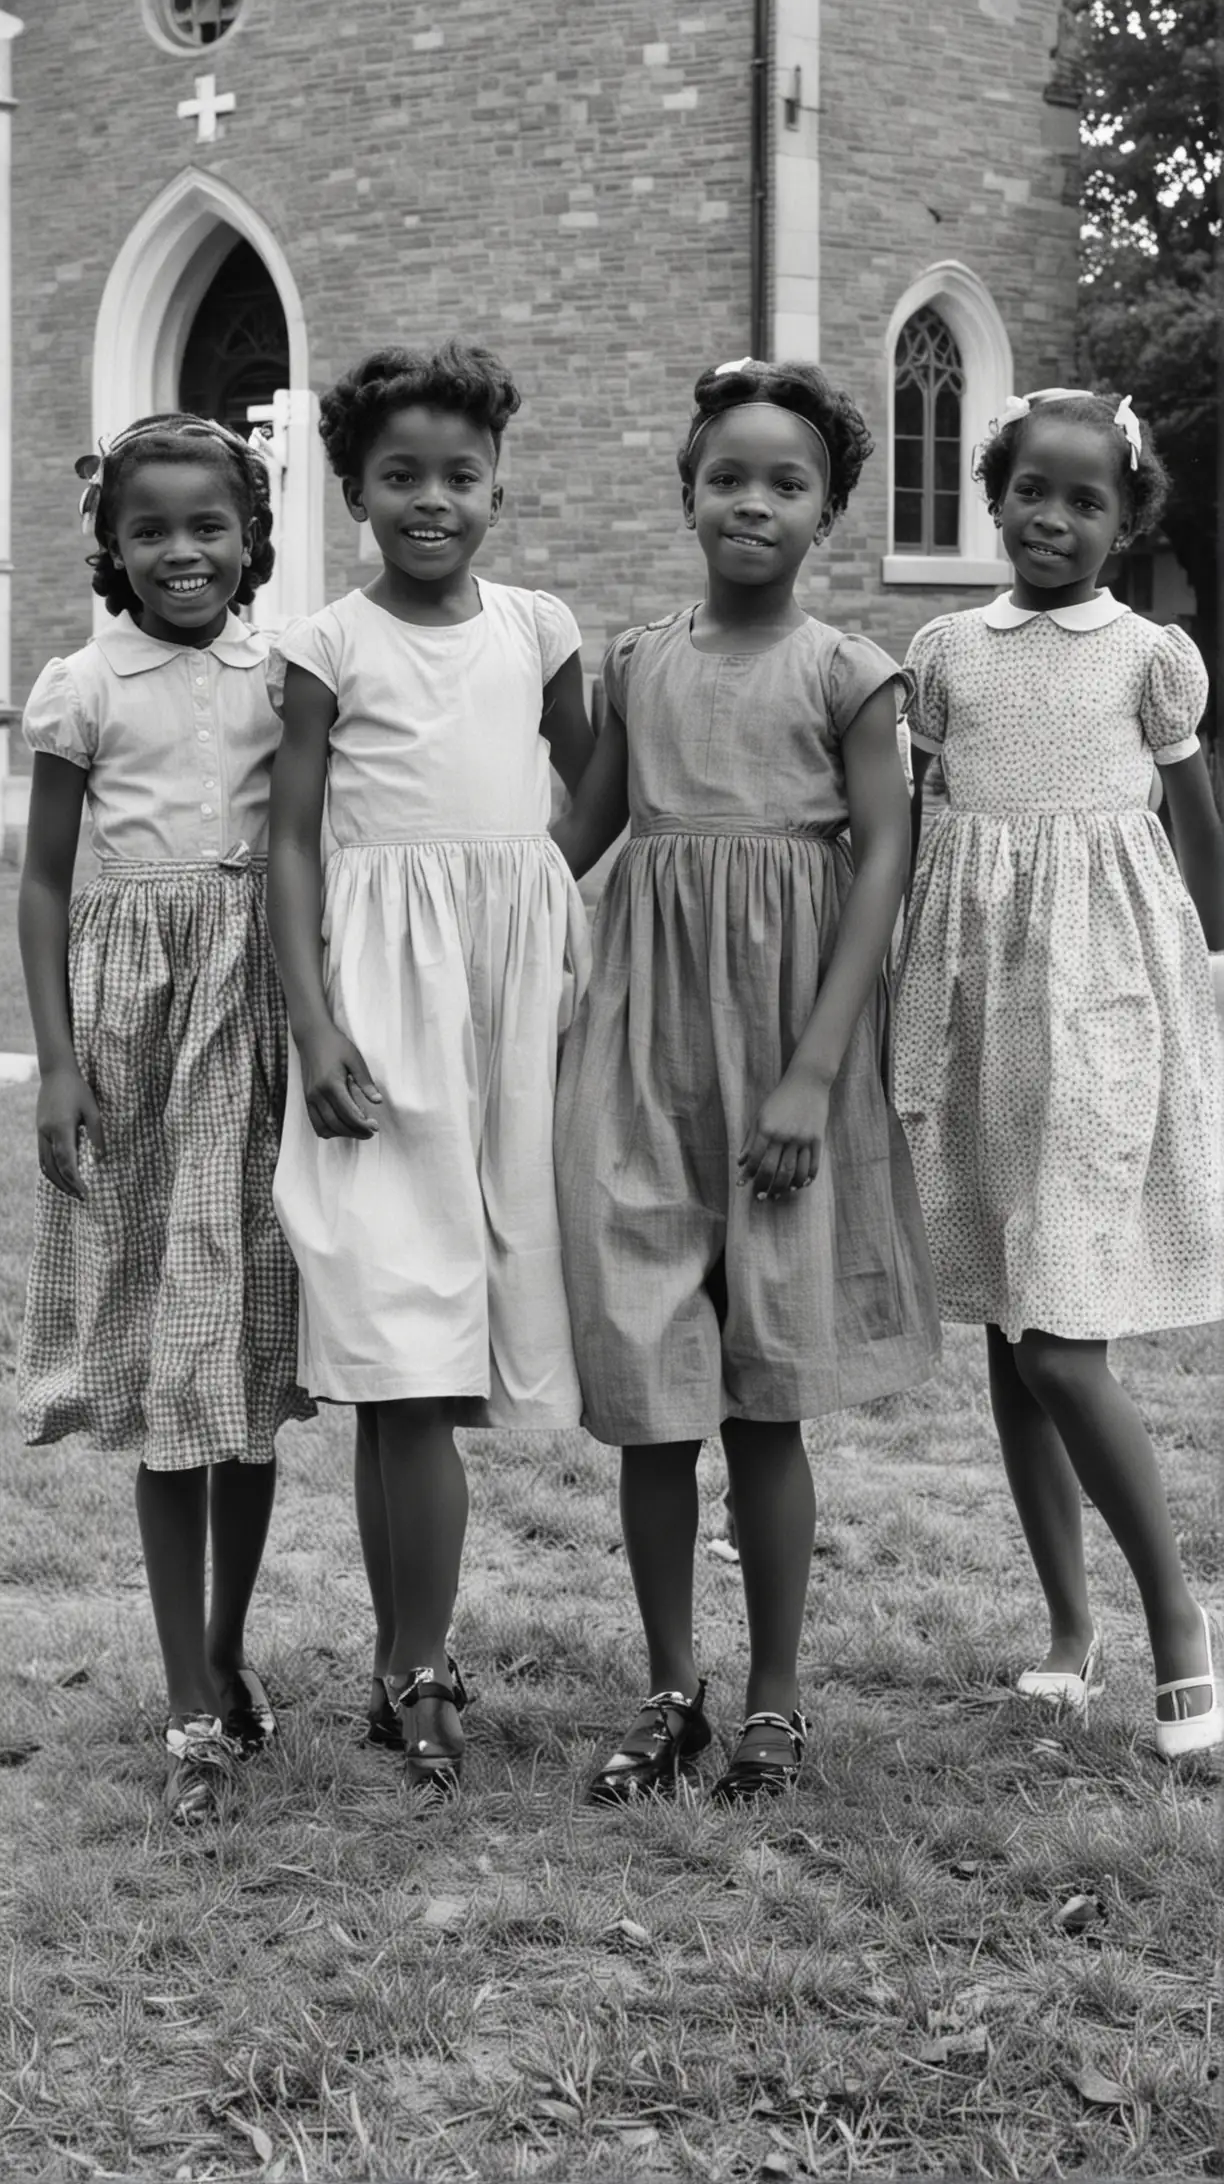 In 1950s, Four black little girls, ages seven, playing outside a church.